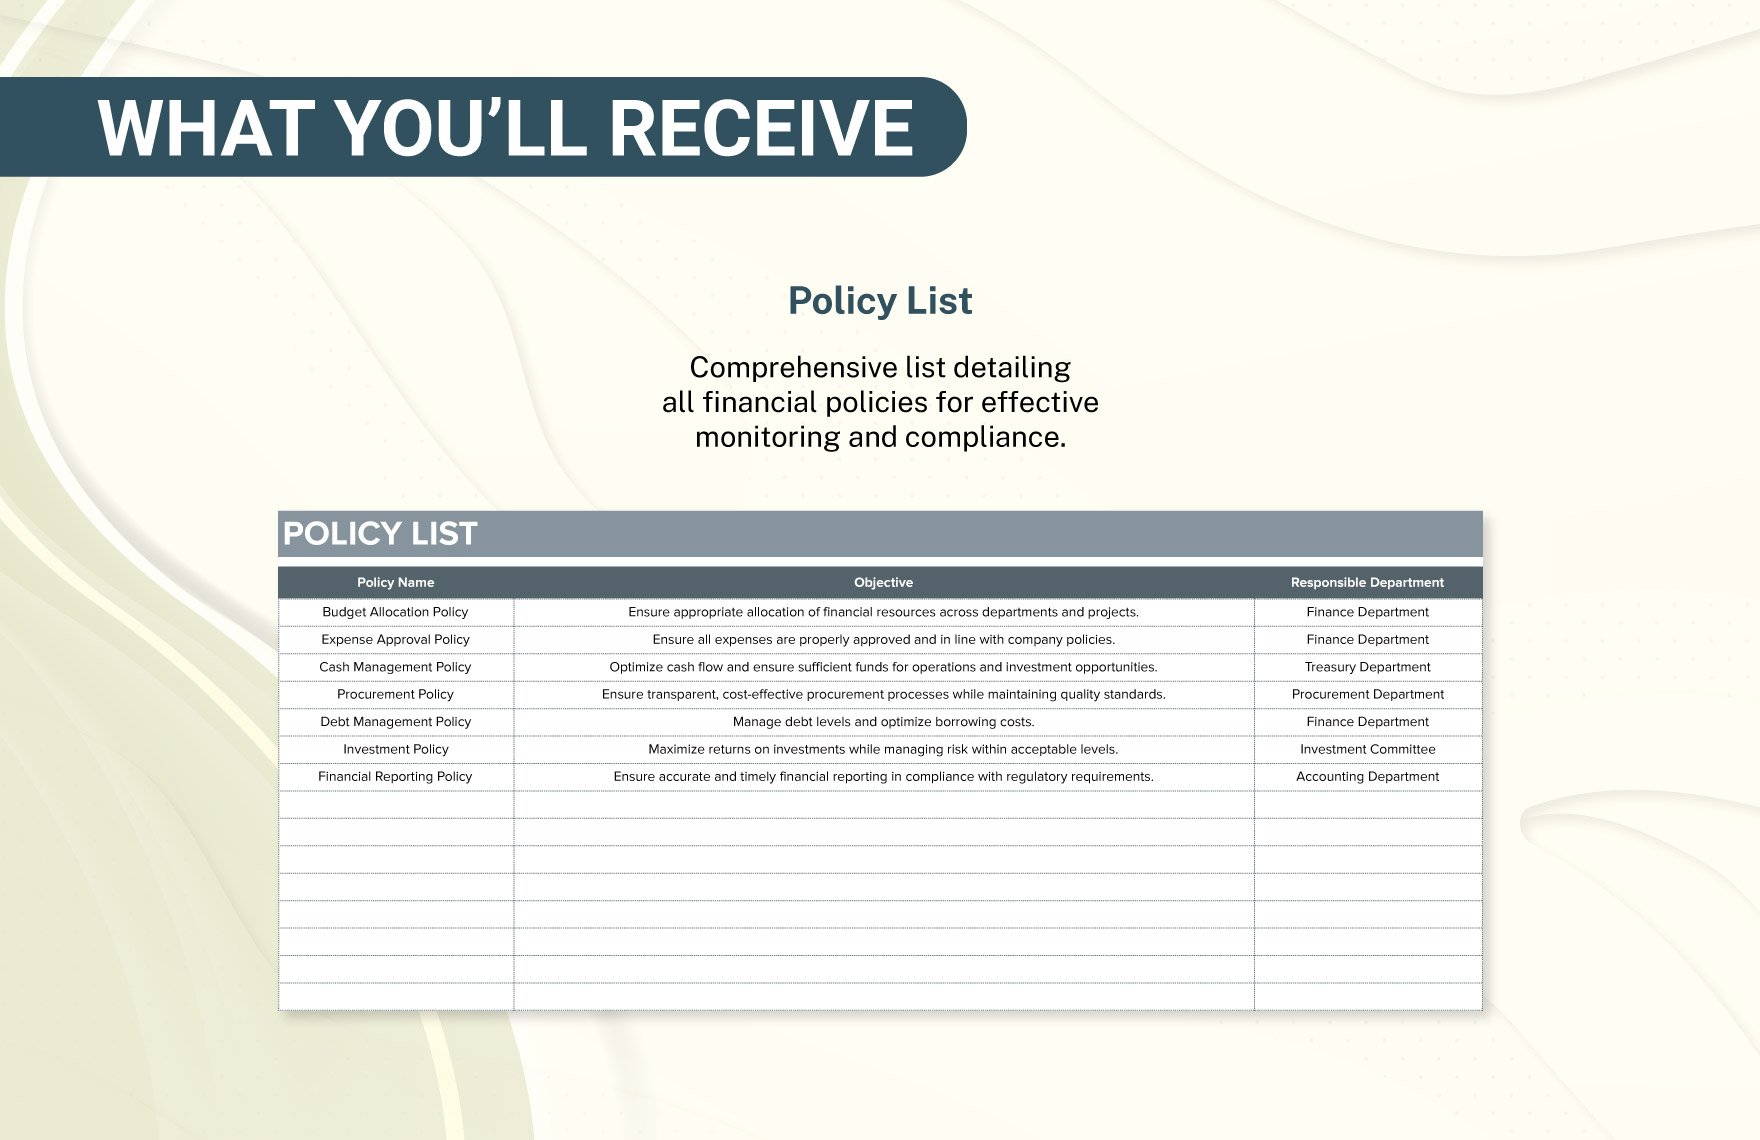 Financial Policy Activities Monitoring Template